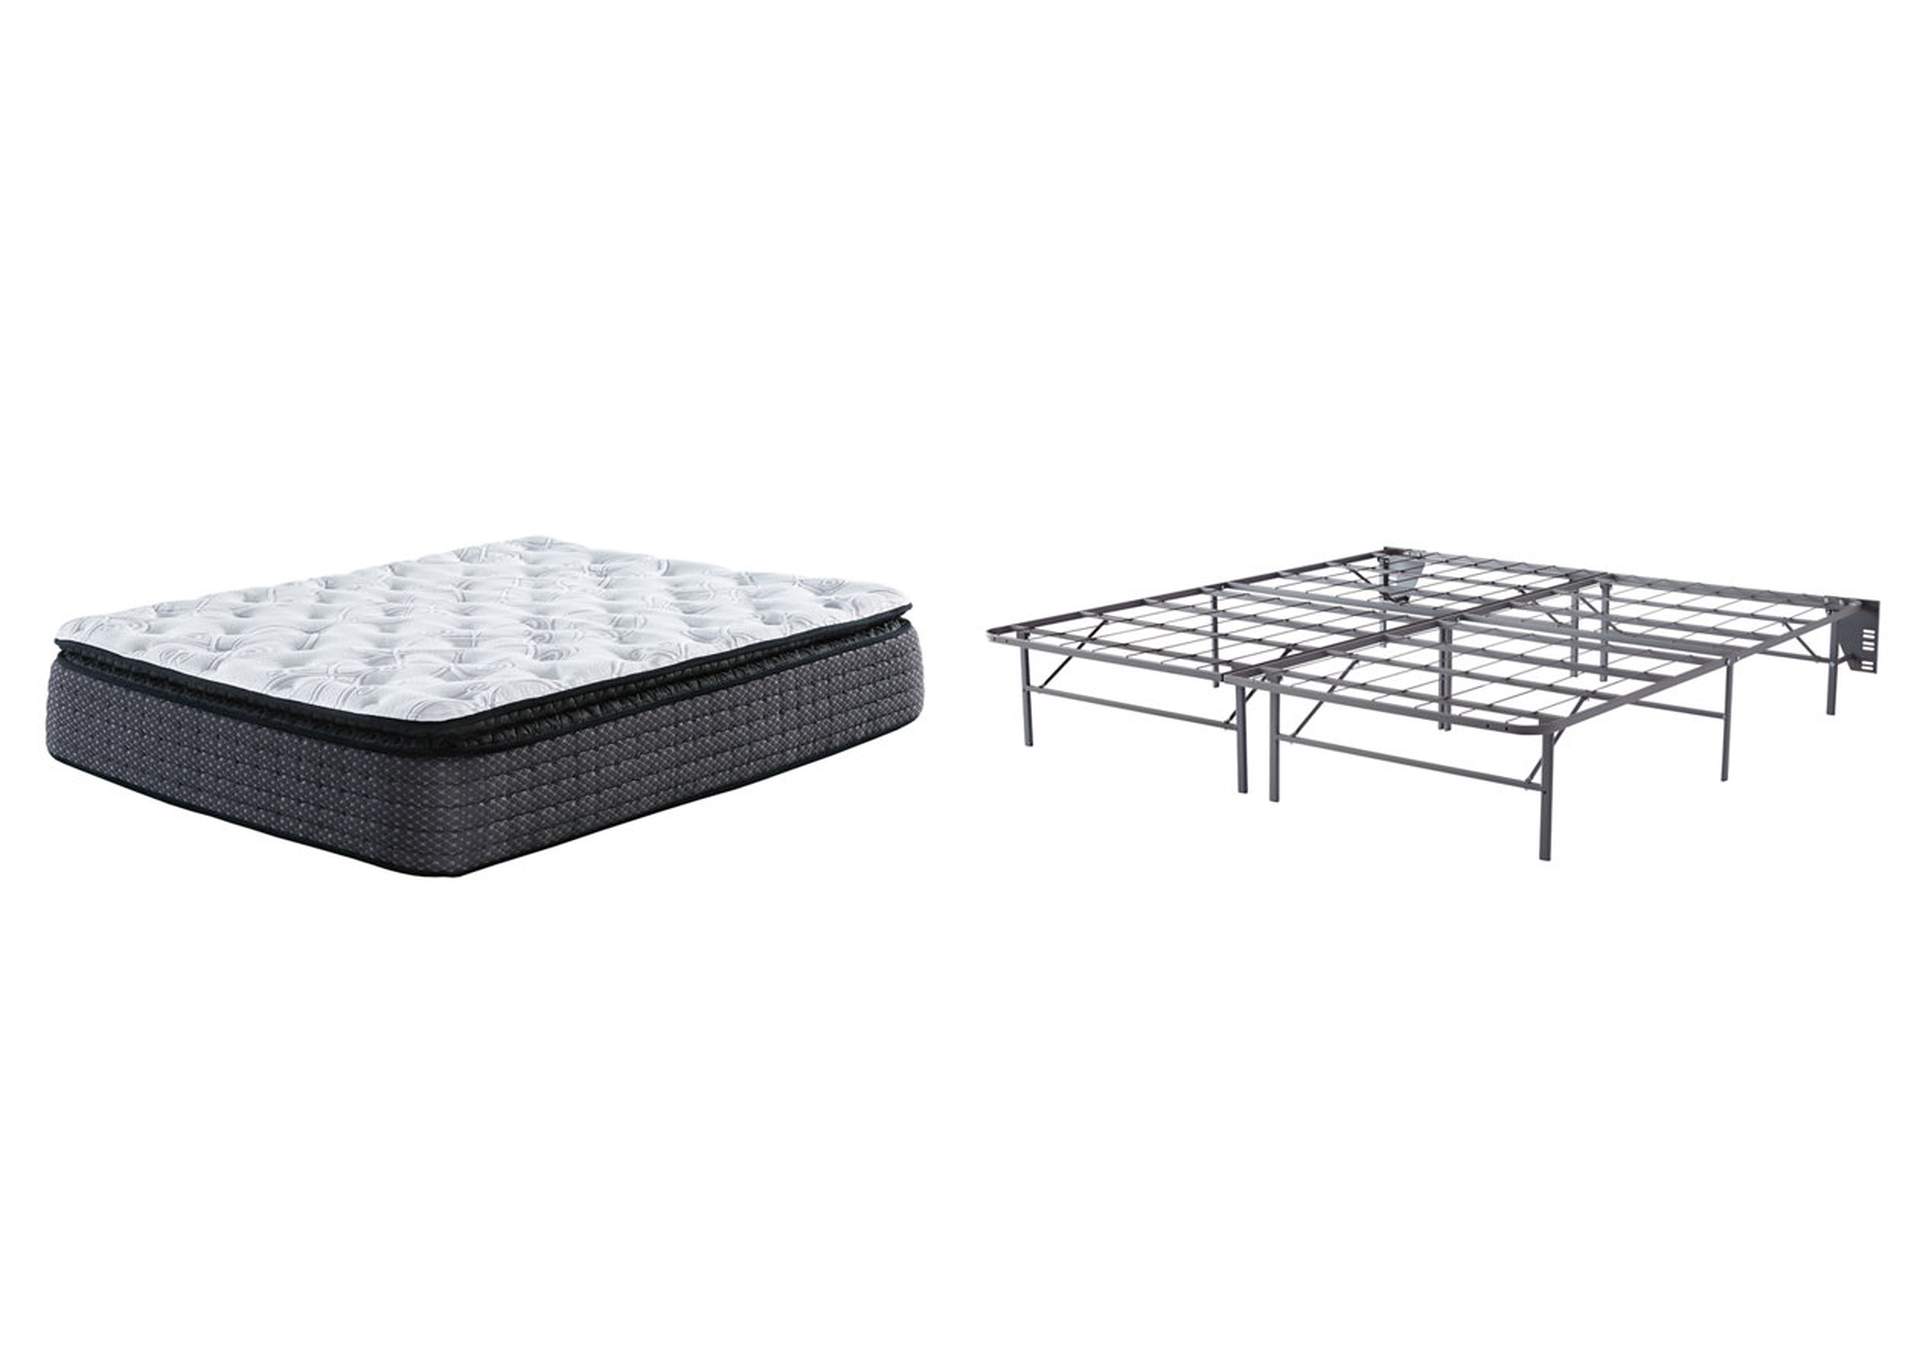 Limited Edition Pillowtop Mattress with Foundation,Sierra Sleep by Ashley